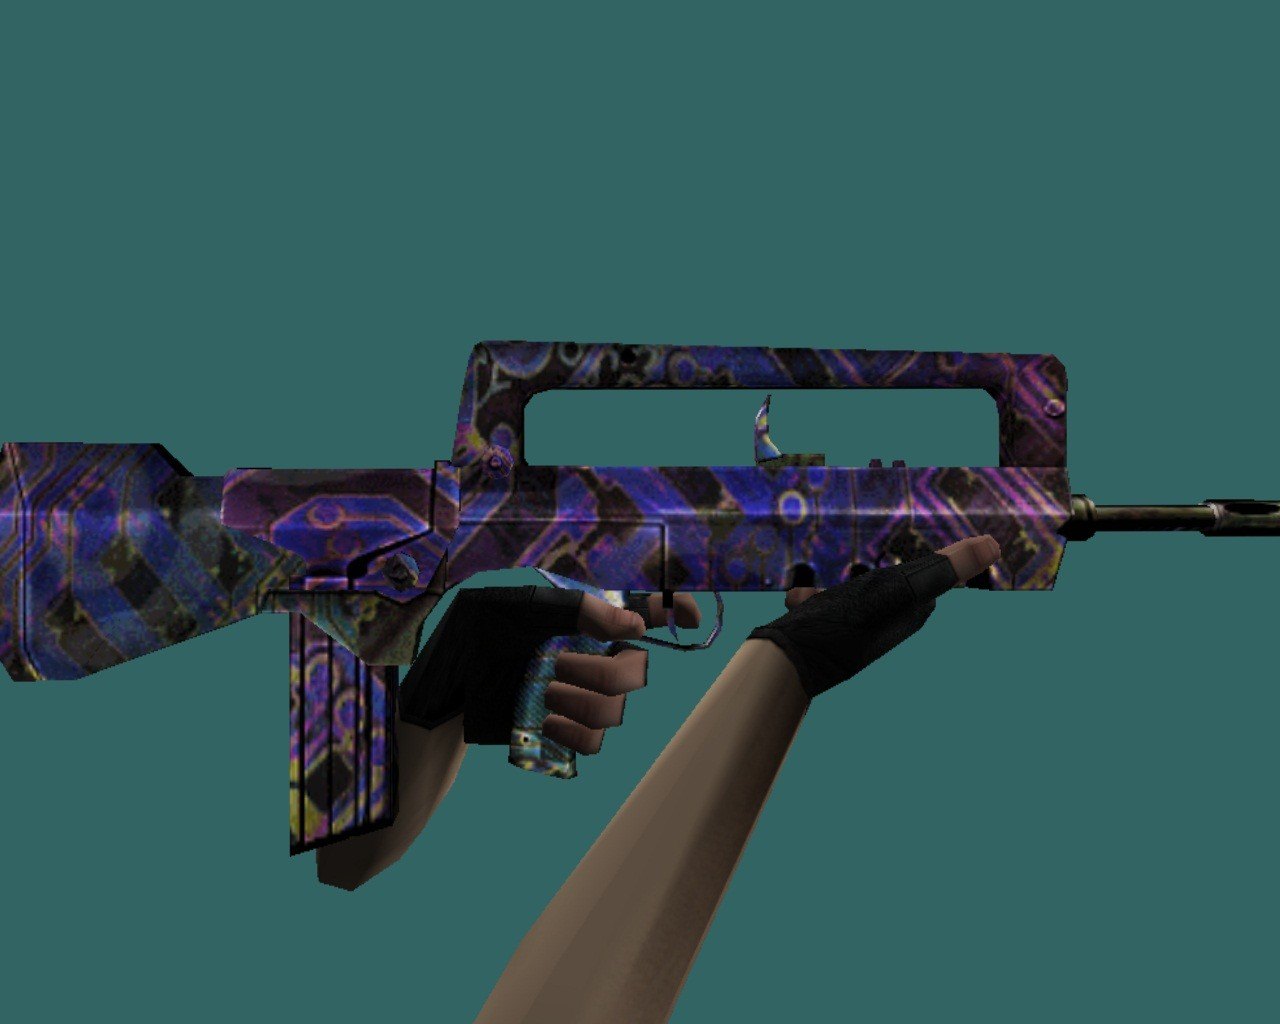 FAMAS Colony cs go skin download the last version for ios